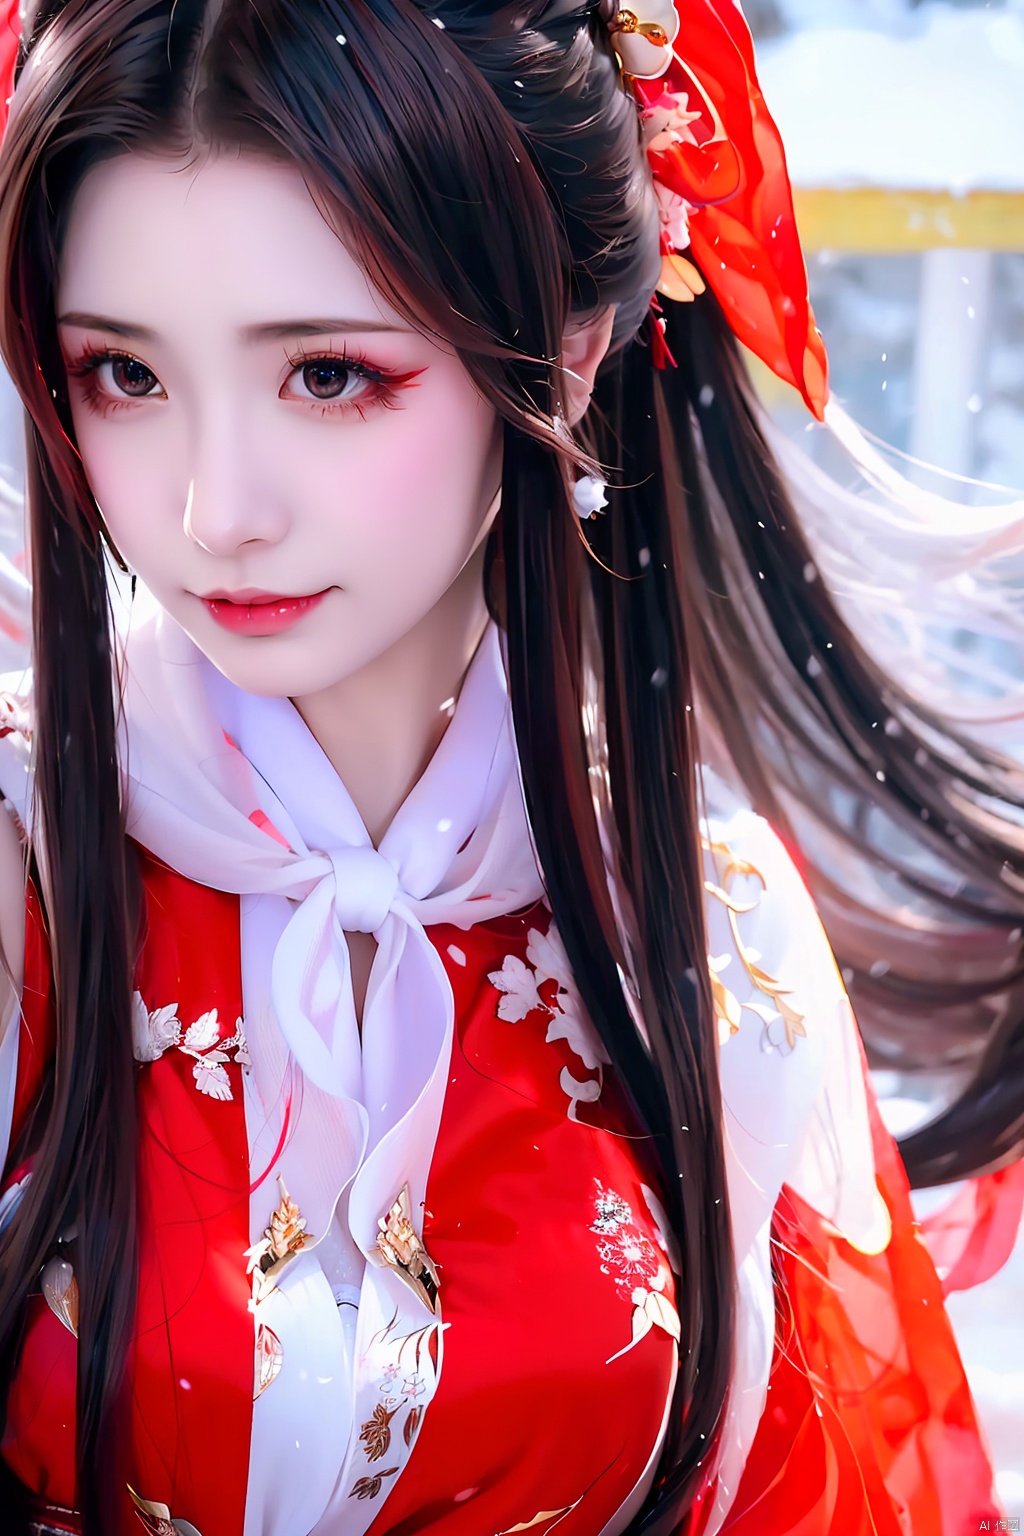  A girl, in the midst of heavy snowfall, wearing a red Hanfu, adorned with jewelry and accessories, possessing ultra-long hair that flows freely, donning a waistcoat, looking directly at the camera, her long hair billowing in the wind.